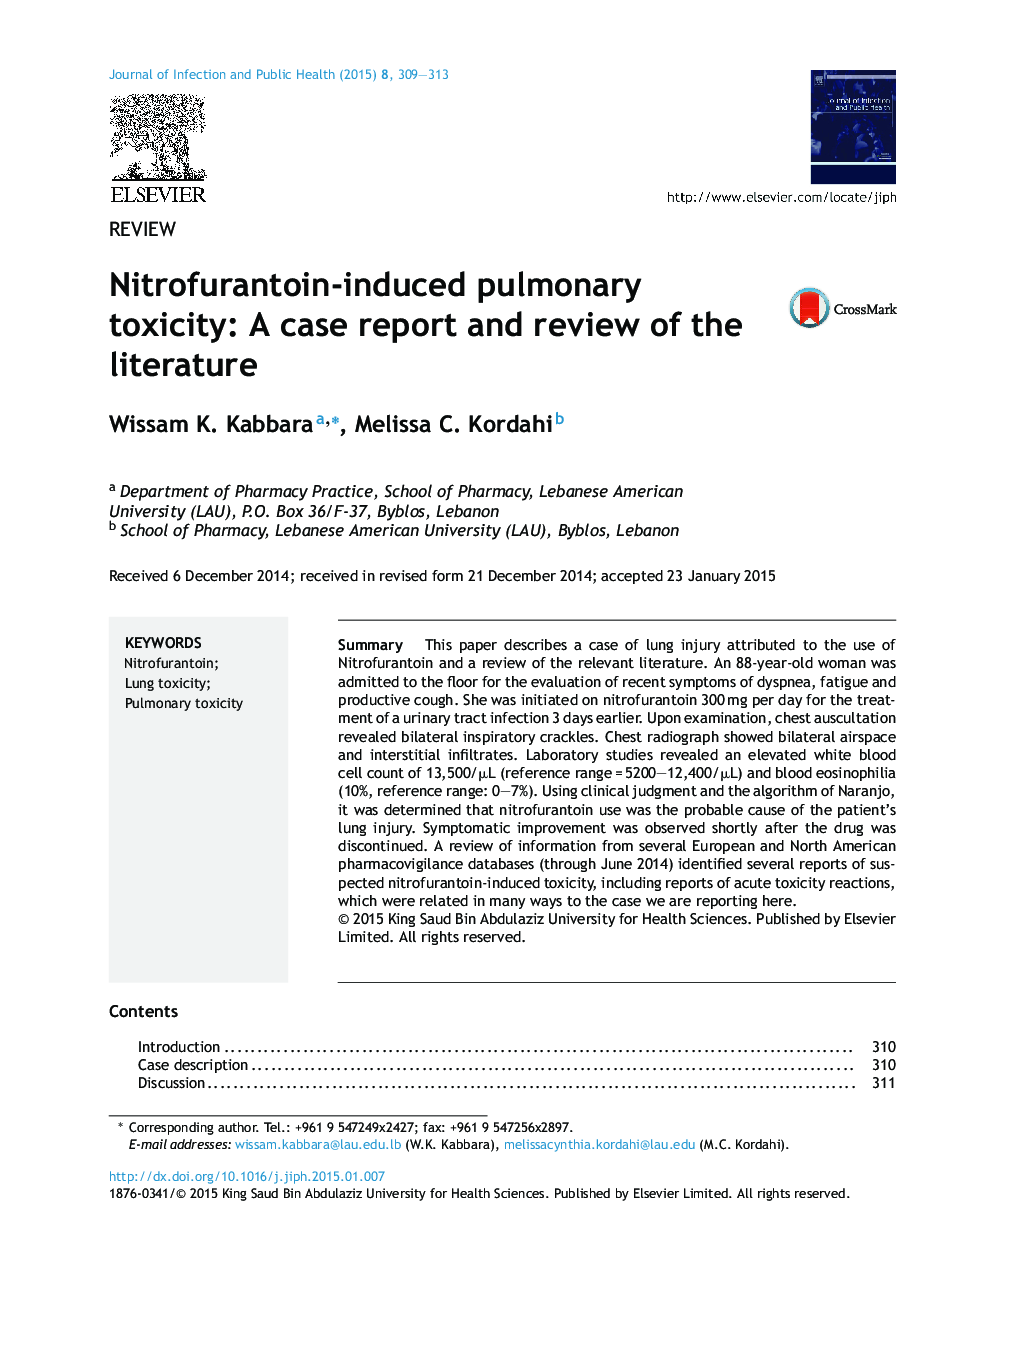 Nitrofurantoin-induced pulmonary toxicity: A case report and review of the literature